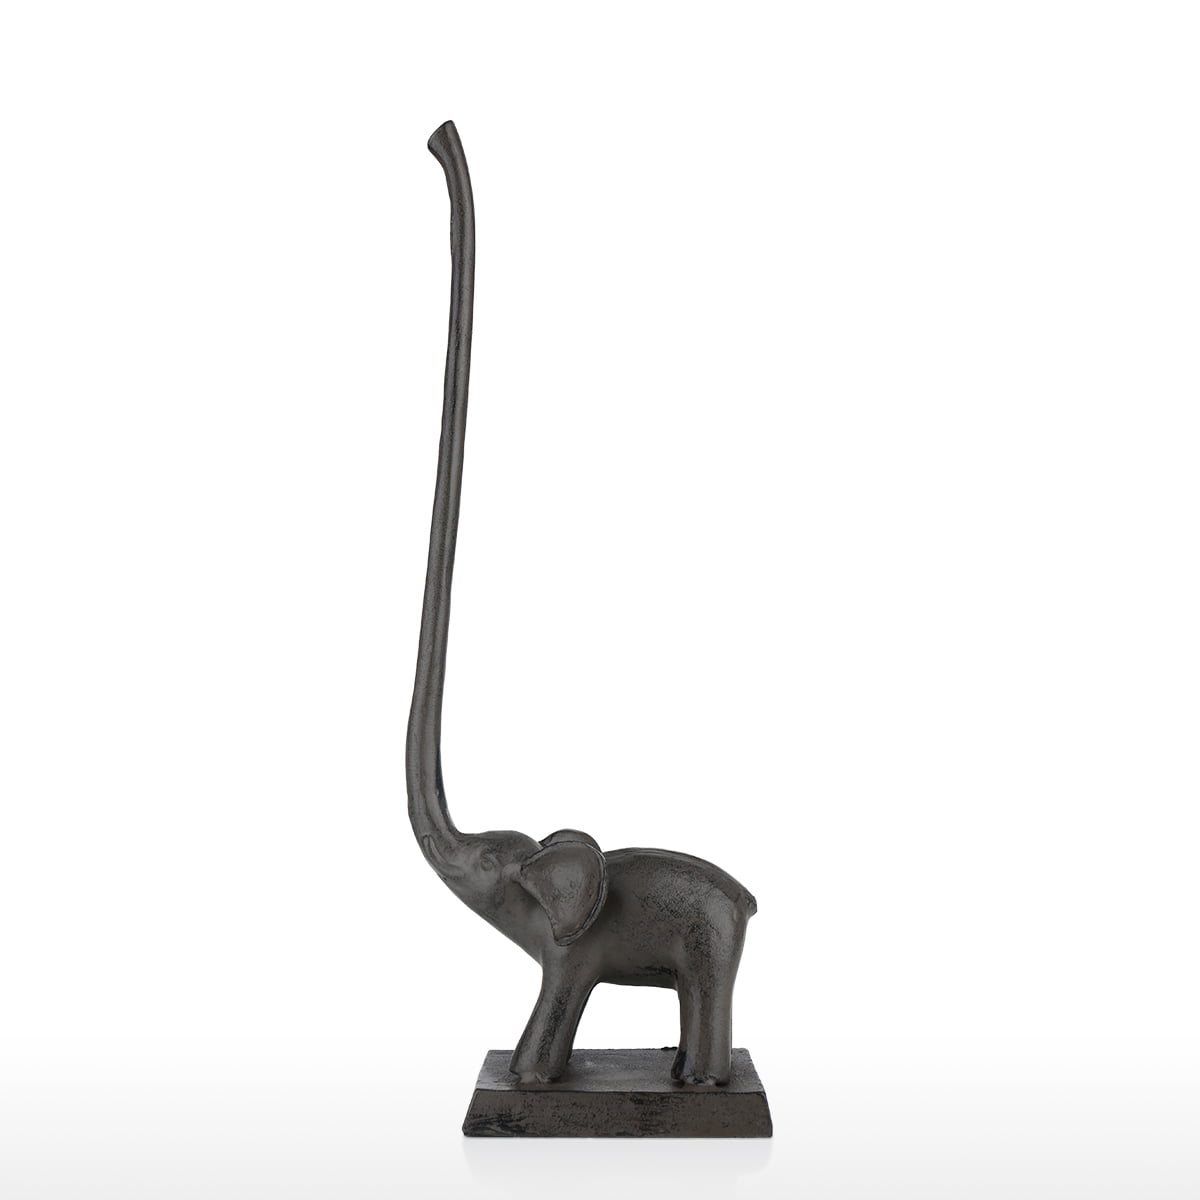 Details about   Elephant statue Craft toilet paper holder Table living room office tissue holder 